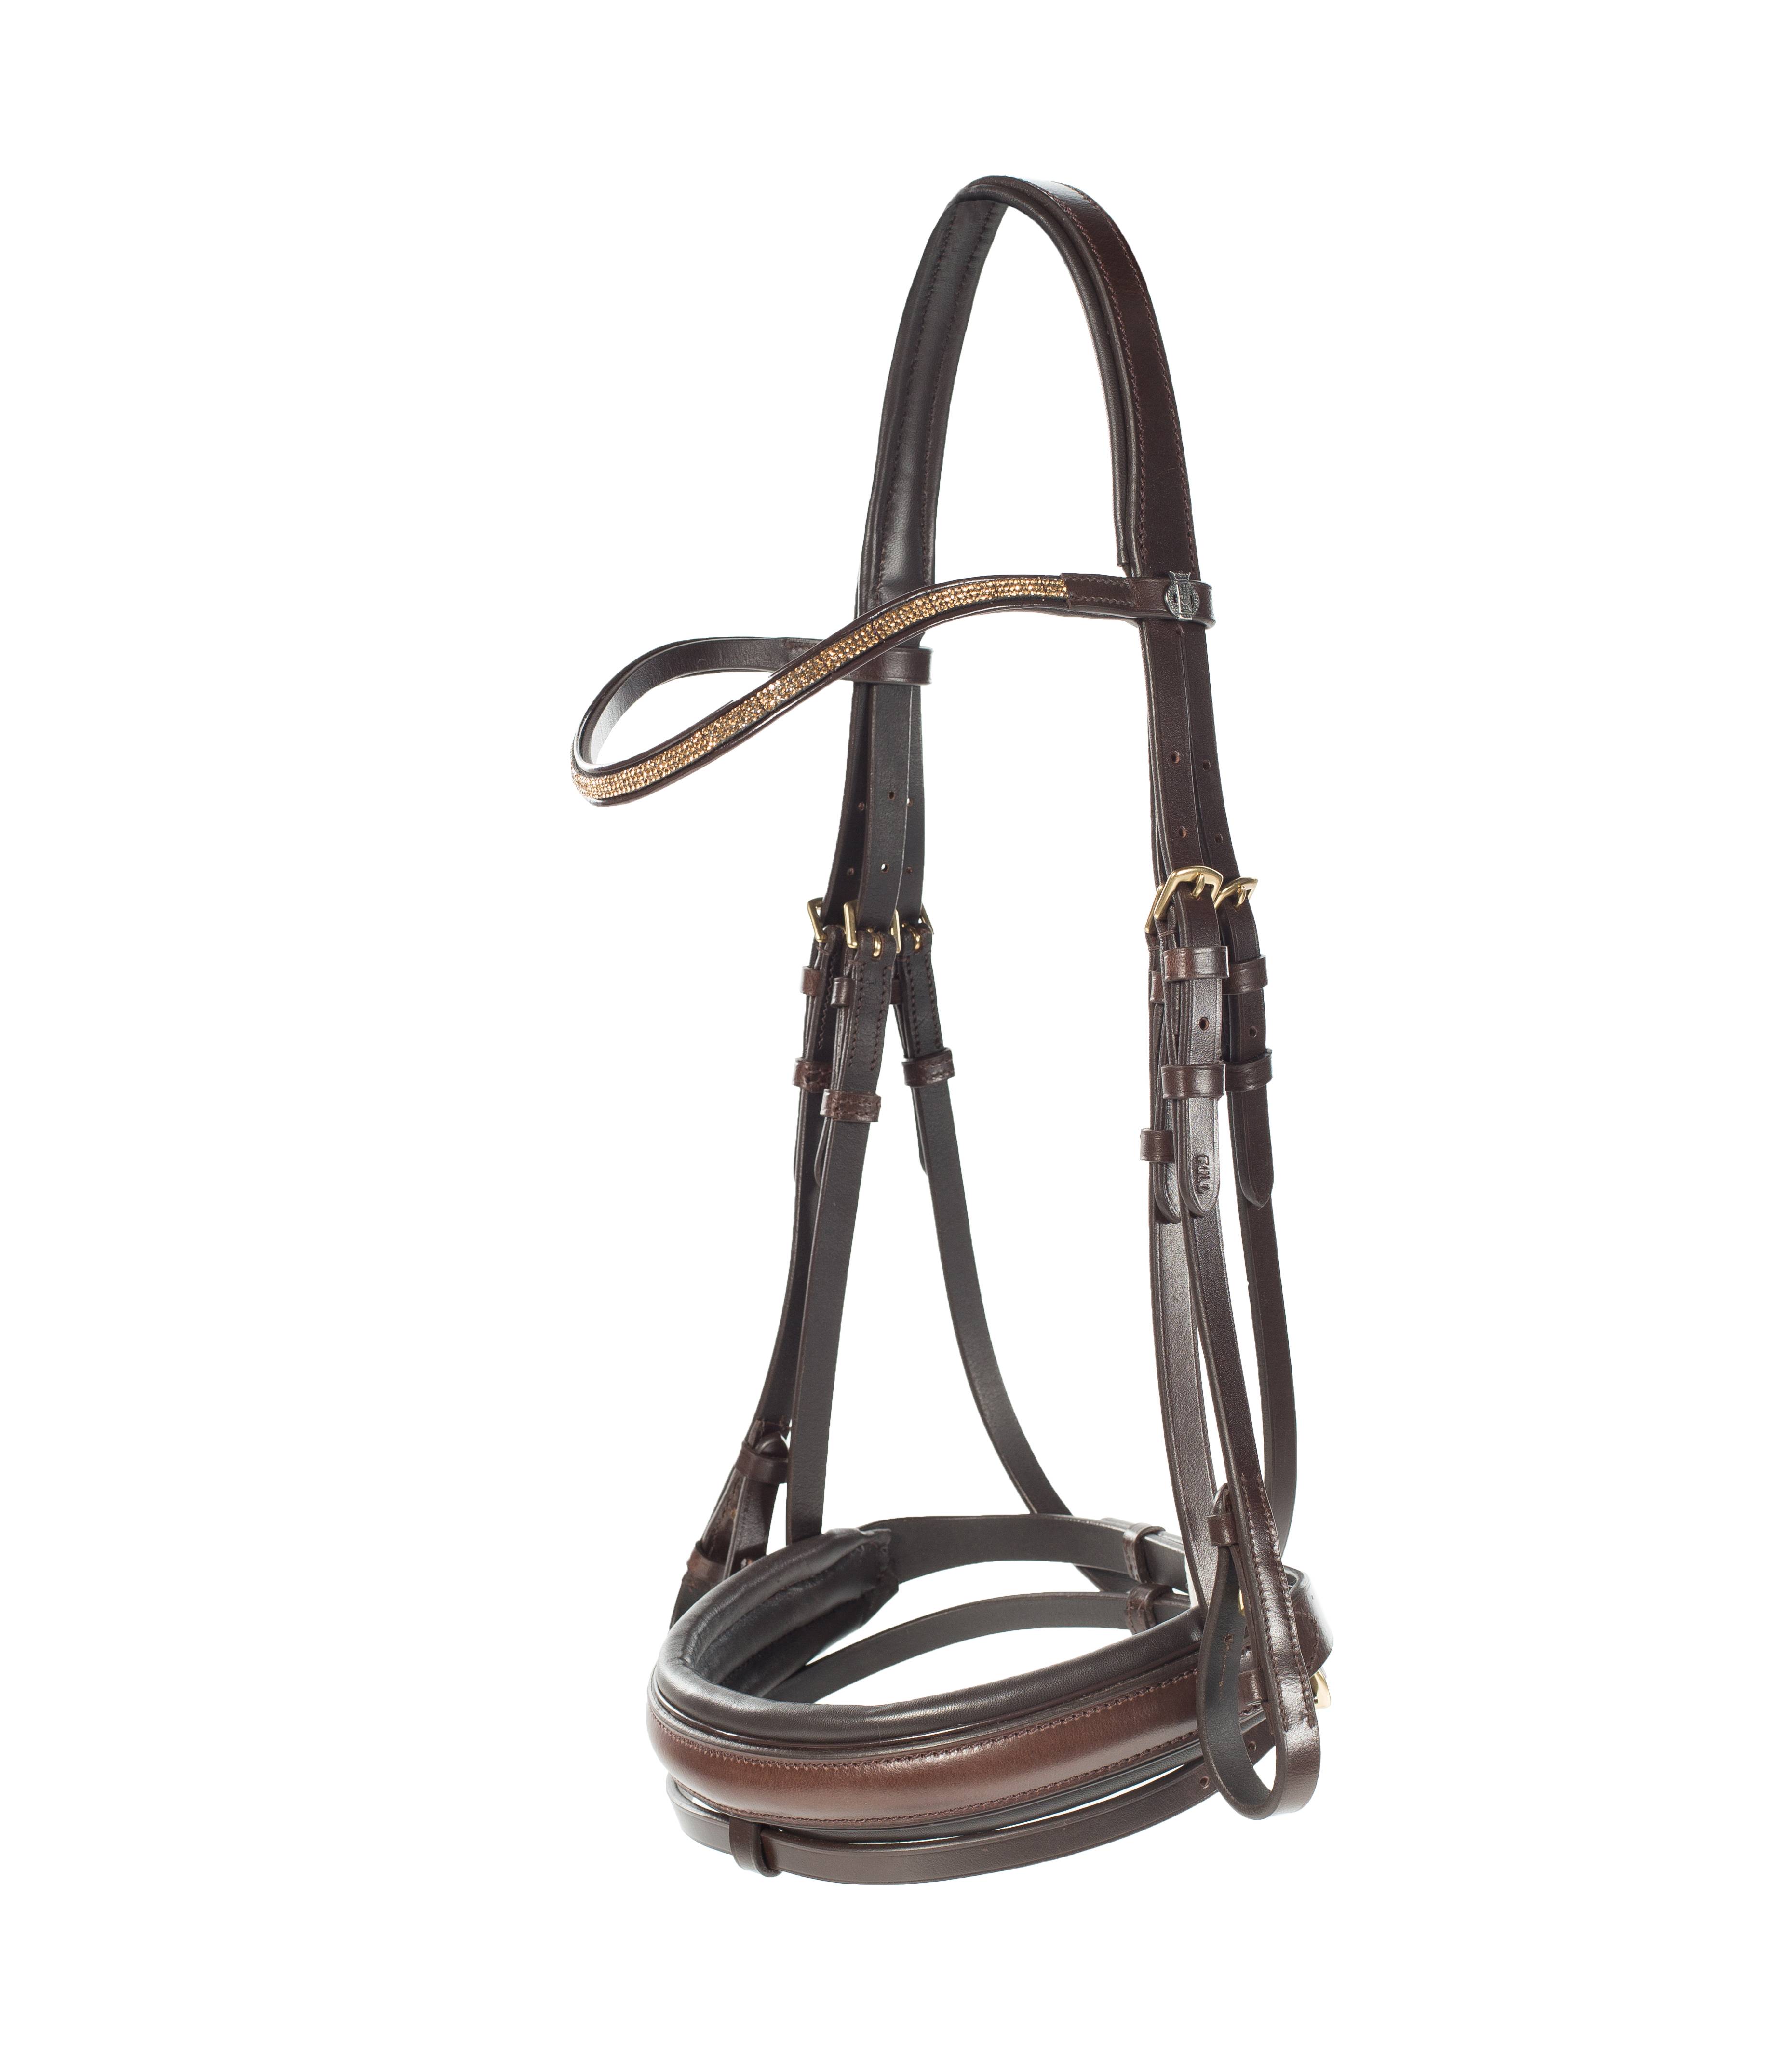 10019-BR-XF Horze Lester Dressage Snaffle Bridle with Reins sku 10019-BR-XF